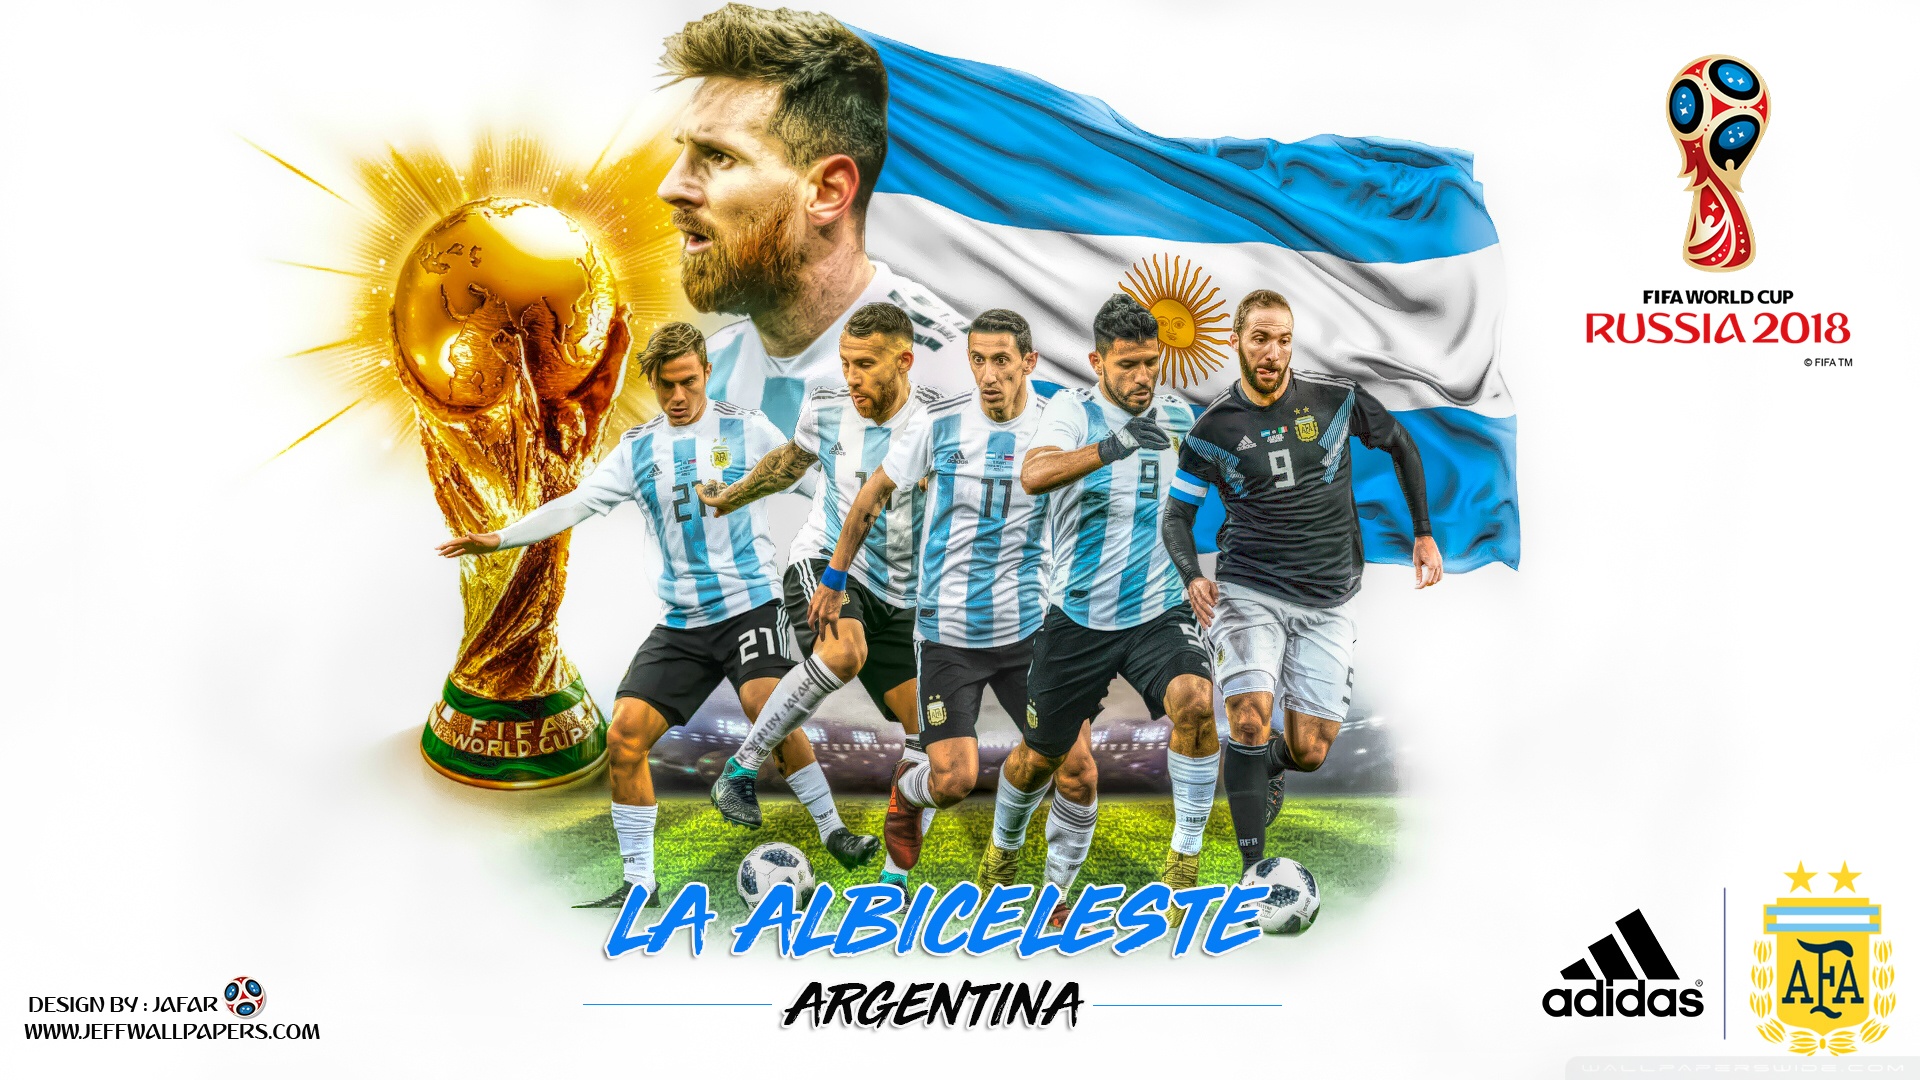 Download Lionel Messi Celebrating With Barcelona and Argentina Logo  Wallpaper | Wallpapers.com